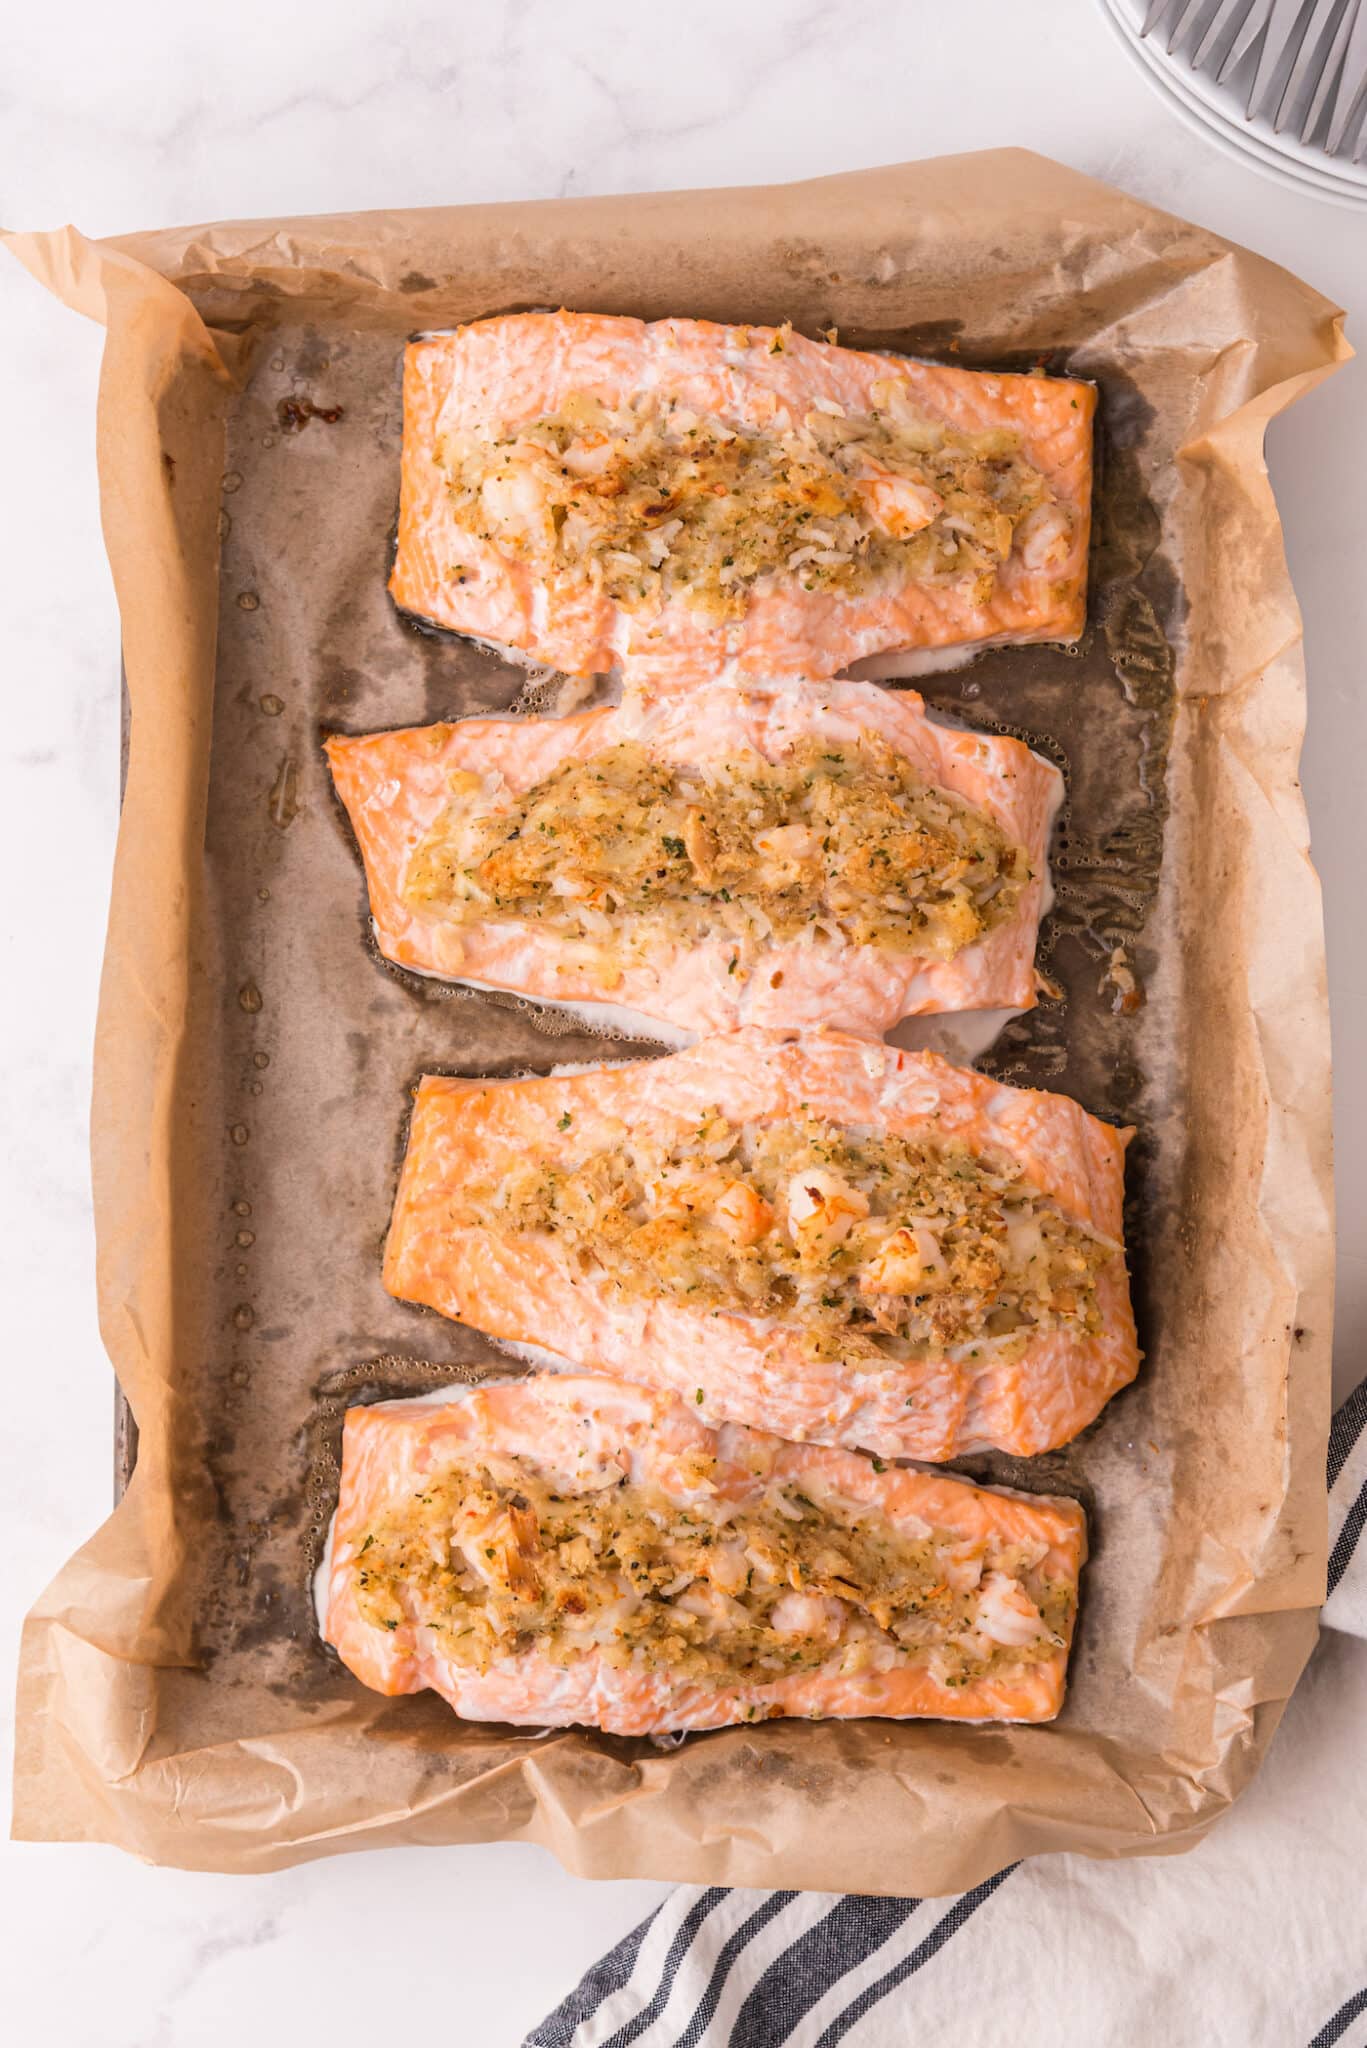 Baked, stuffed salmon filets in a parchment lined baking dish.